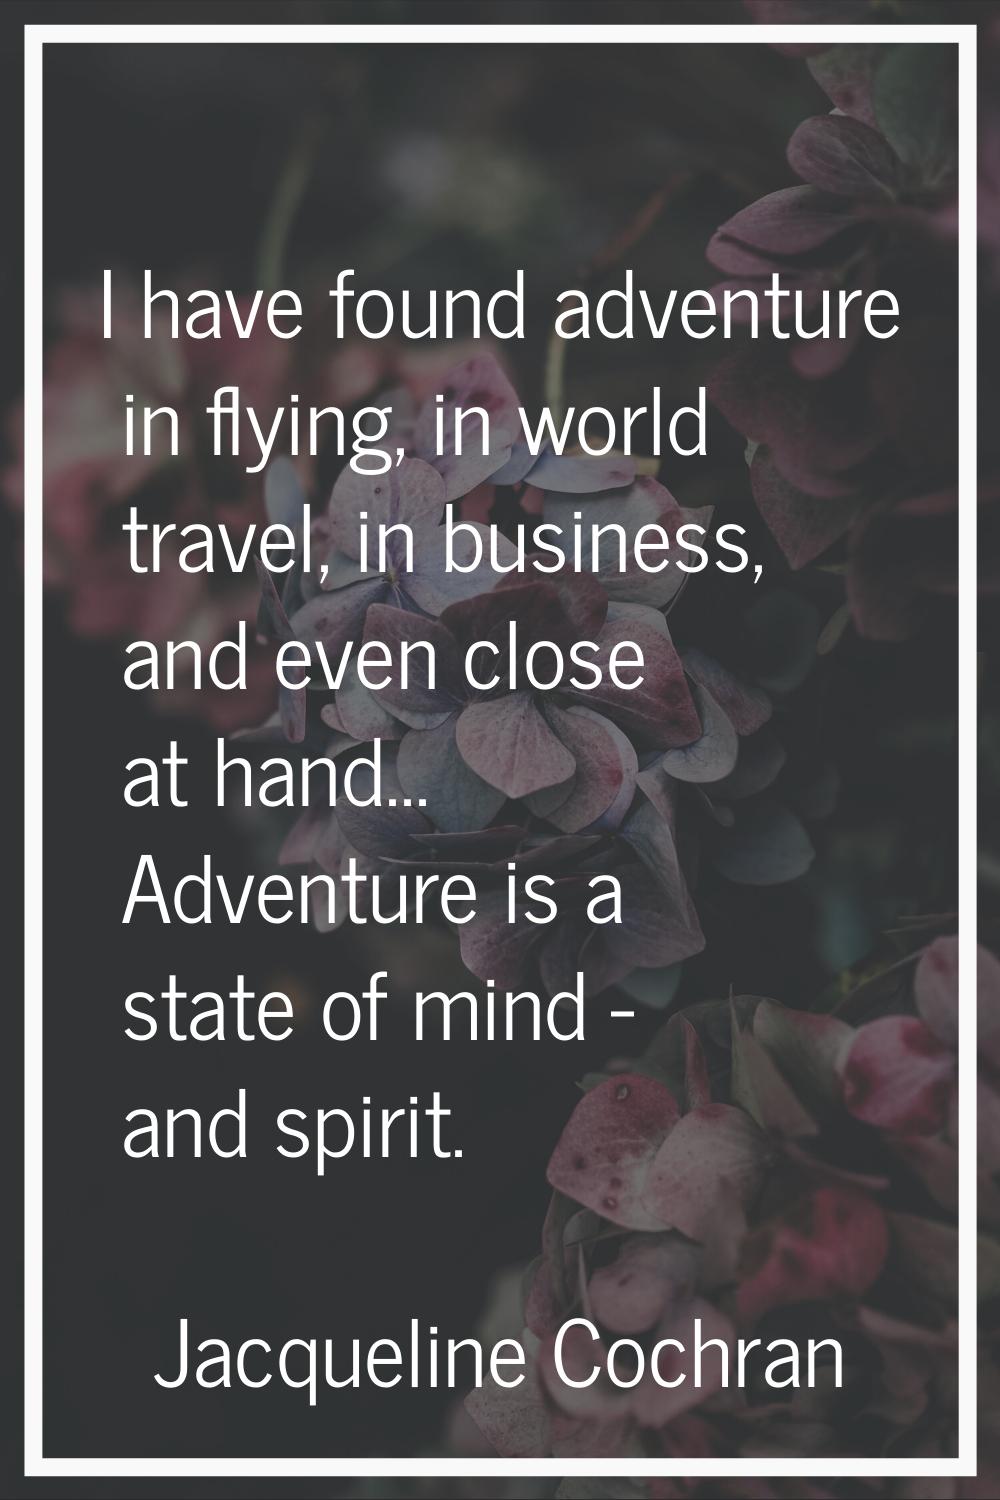 I have found adventure in flying, in world travel, in business, and even close at hand... Adventure